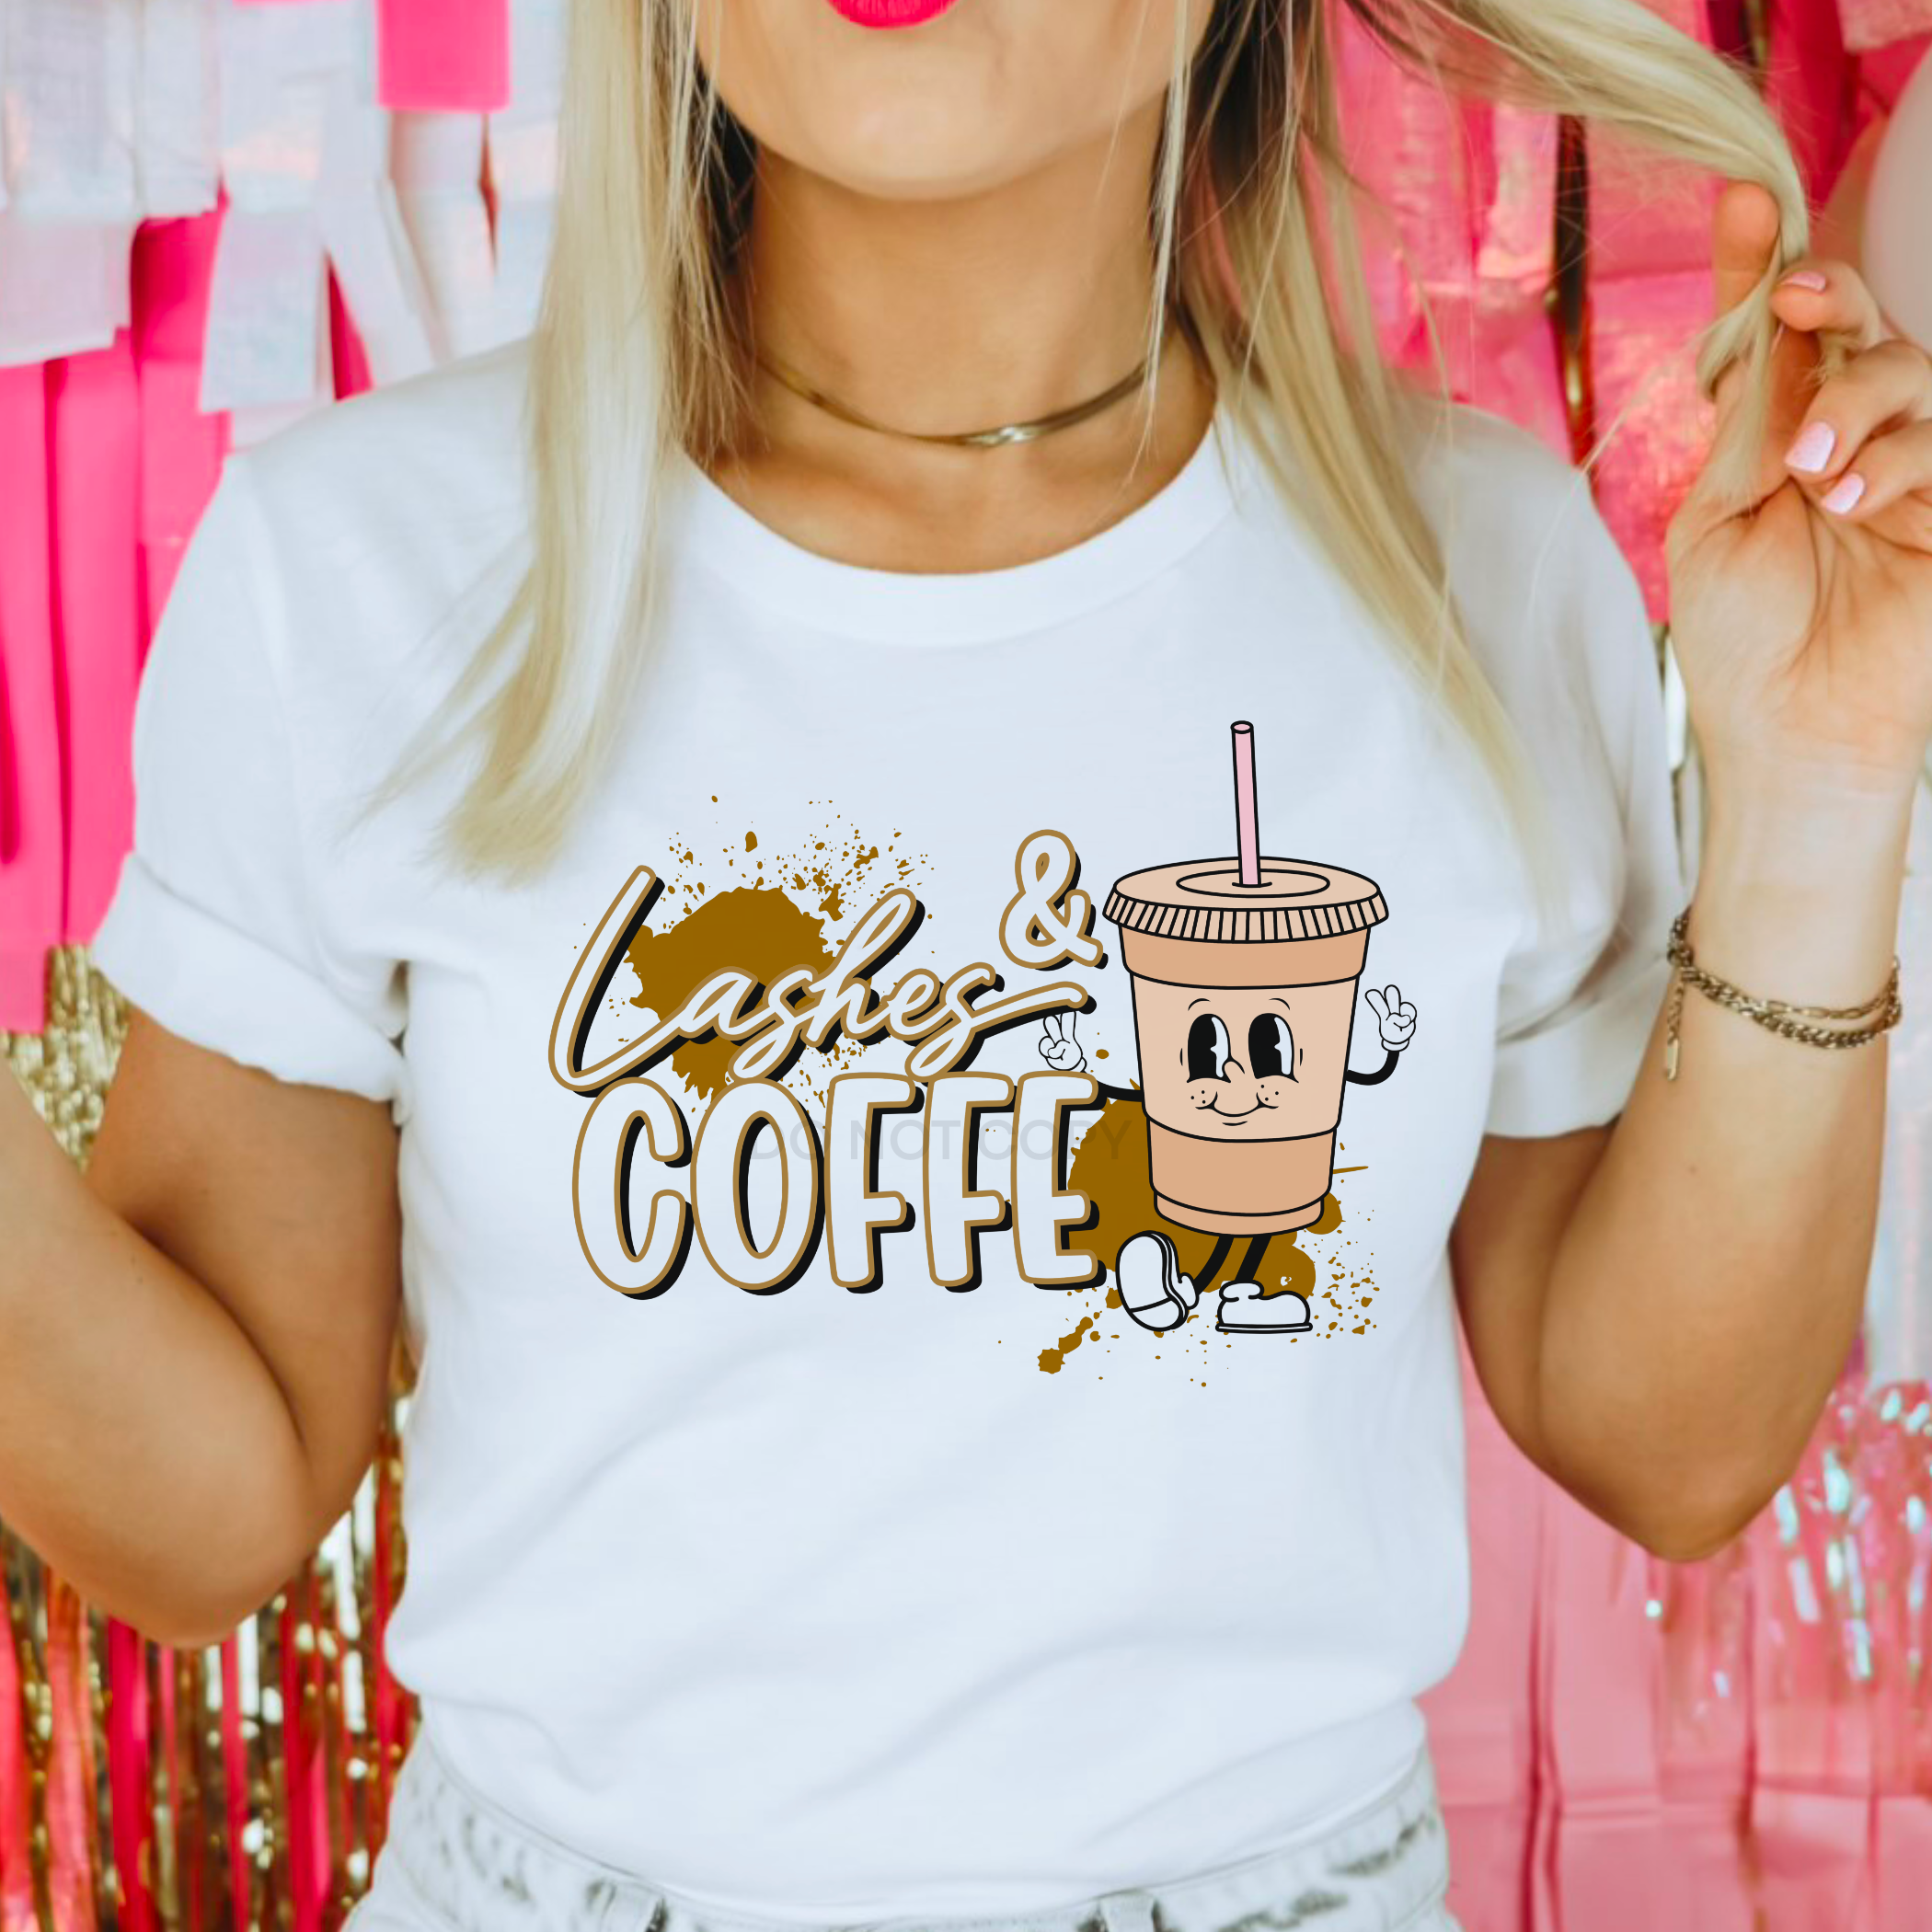 Lashes & Coffee Sublimation Transfer